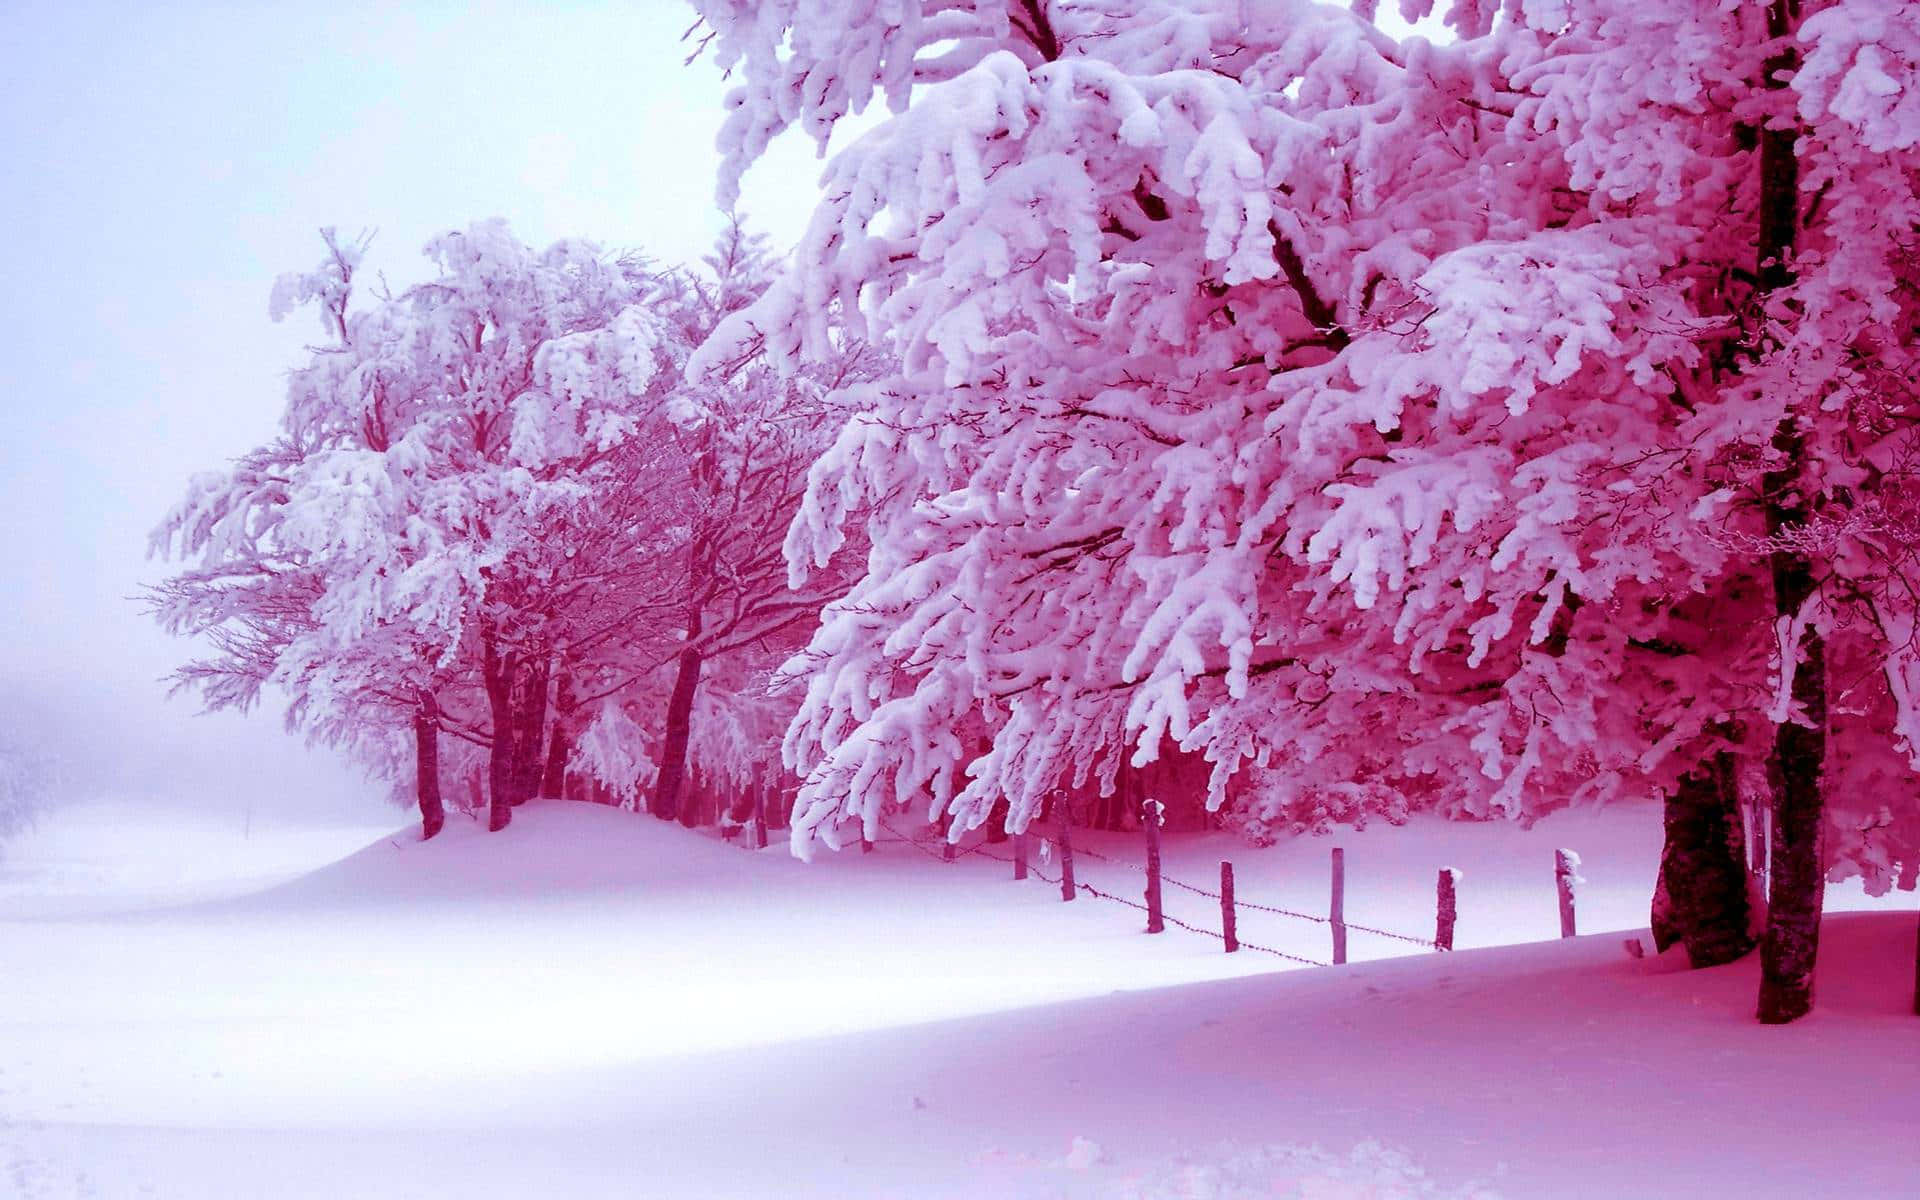 "Captivating winter scene of snow and trees"